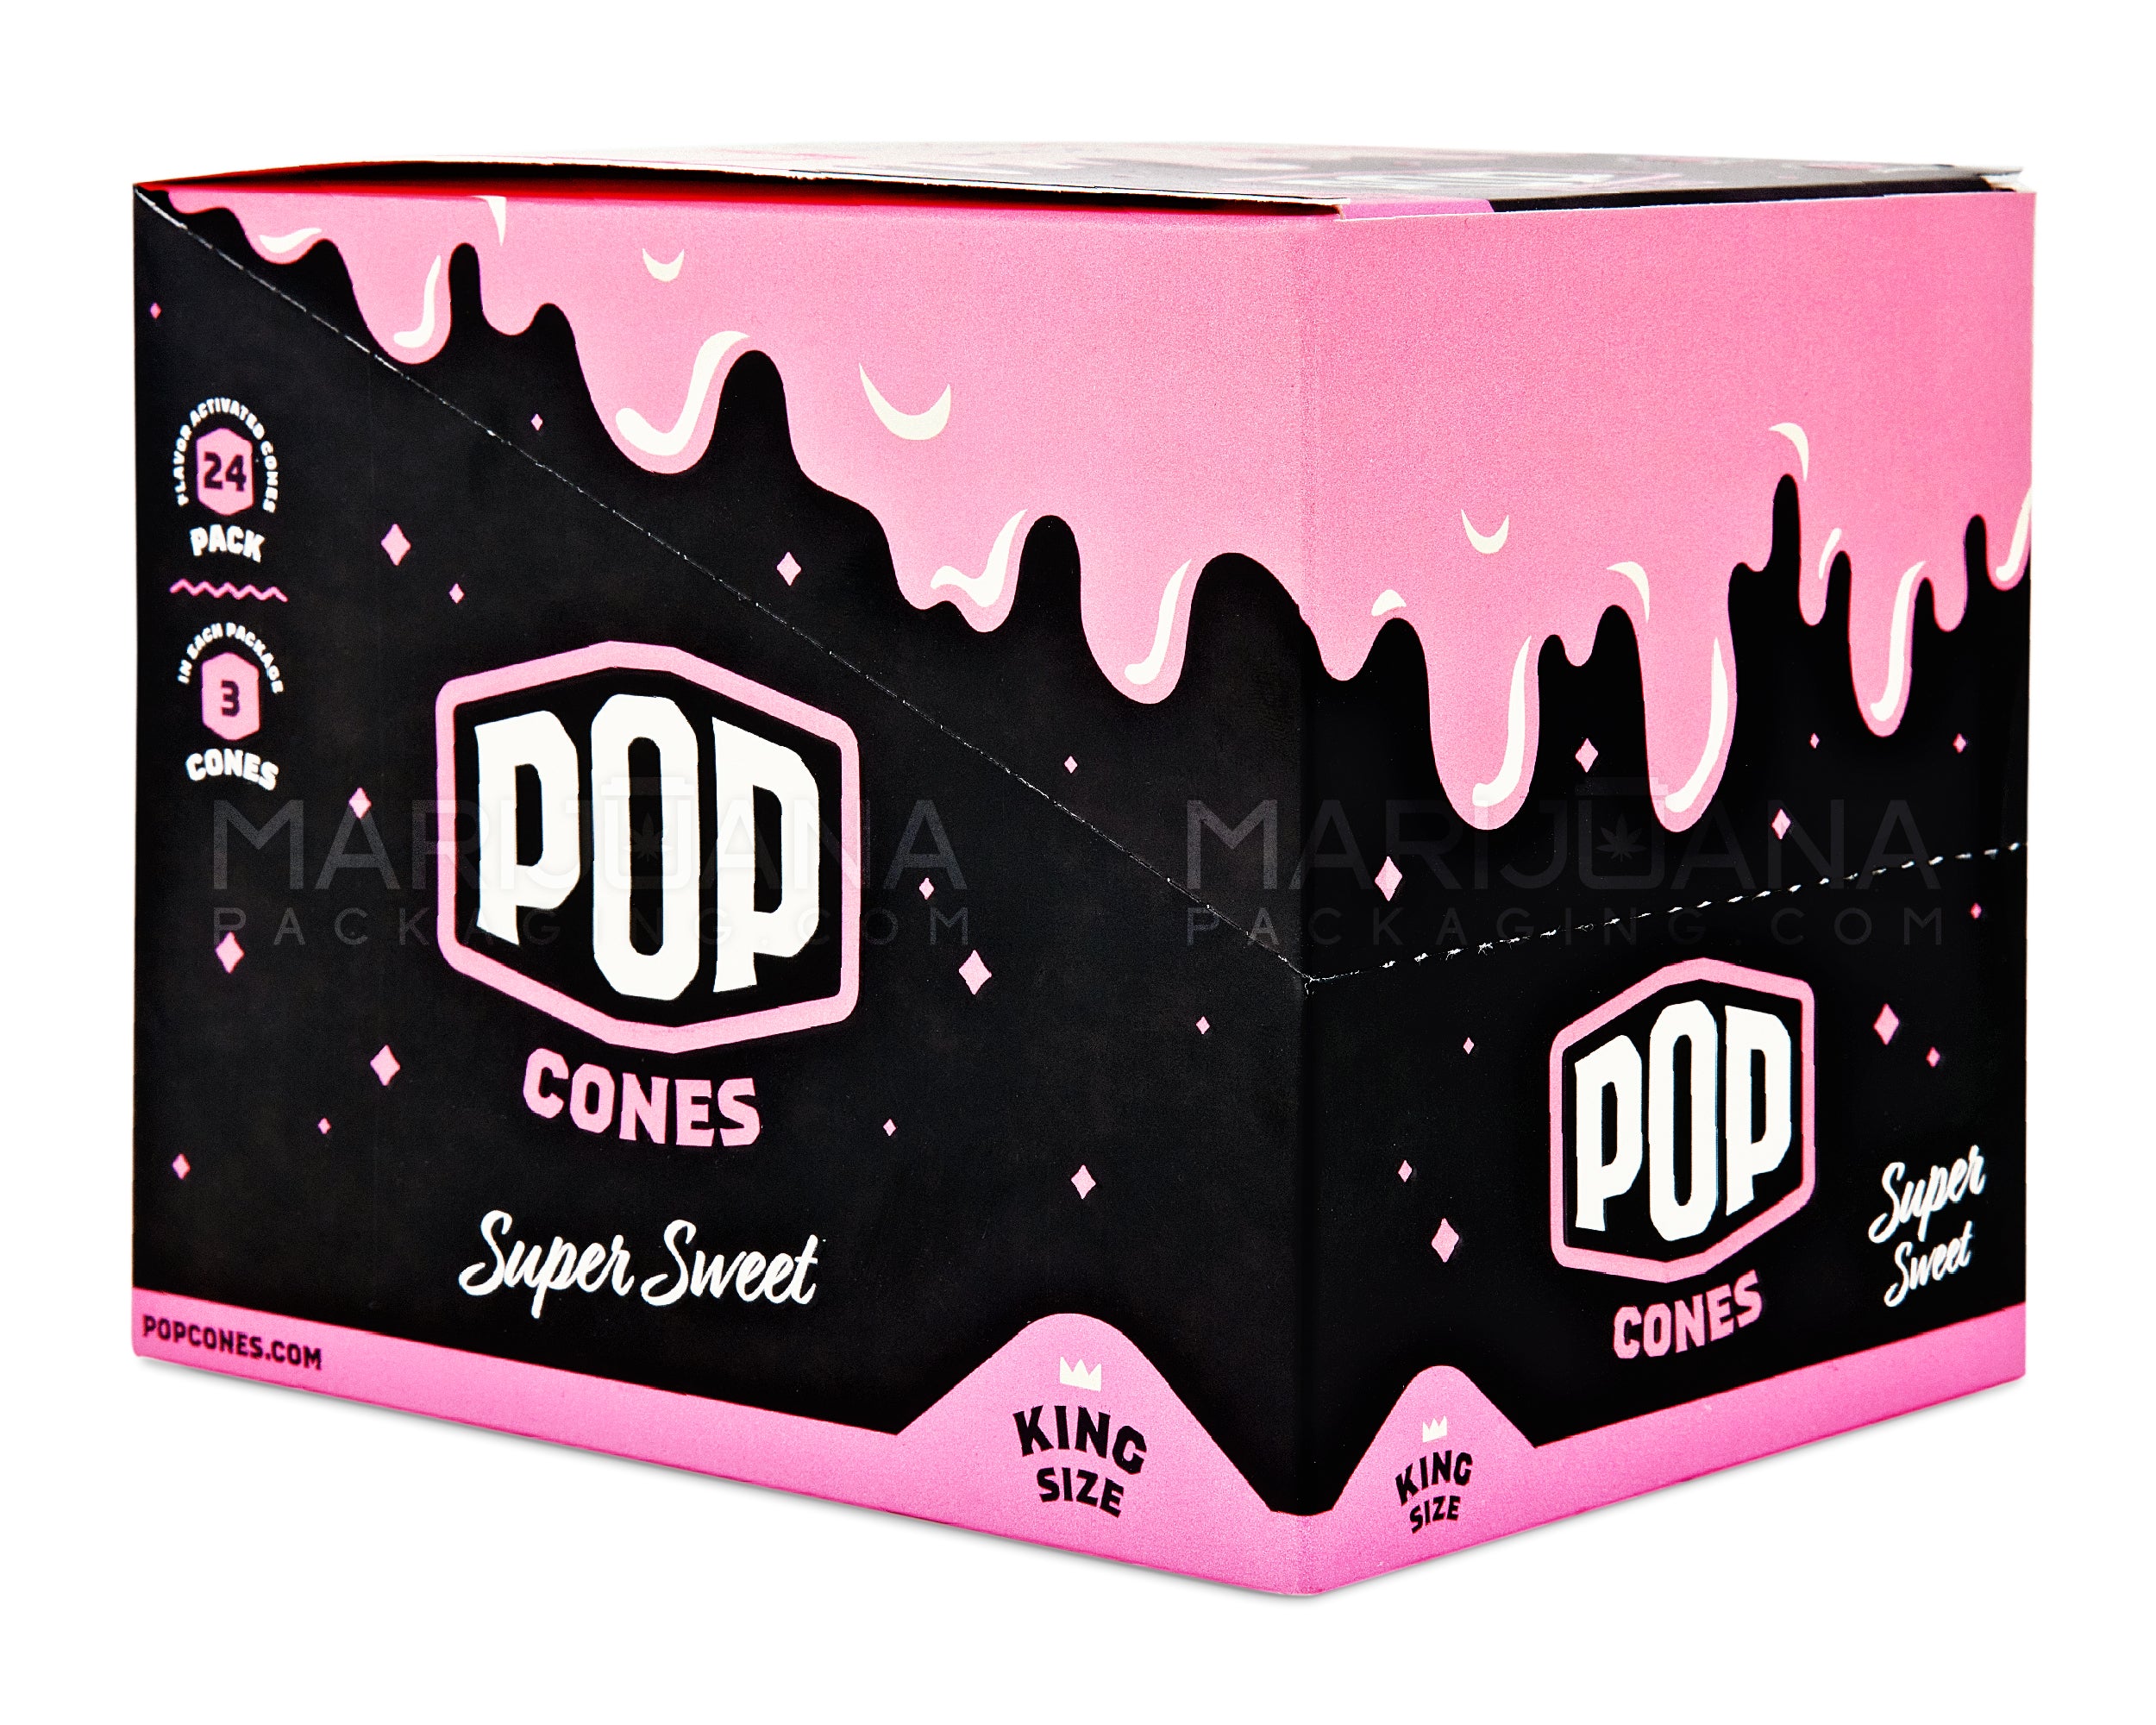 POP CONES | 'Retail Display' King Size Pre-Rolled Cones | 109mm - Super Sweet - 24 Count - 6